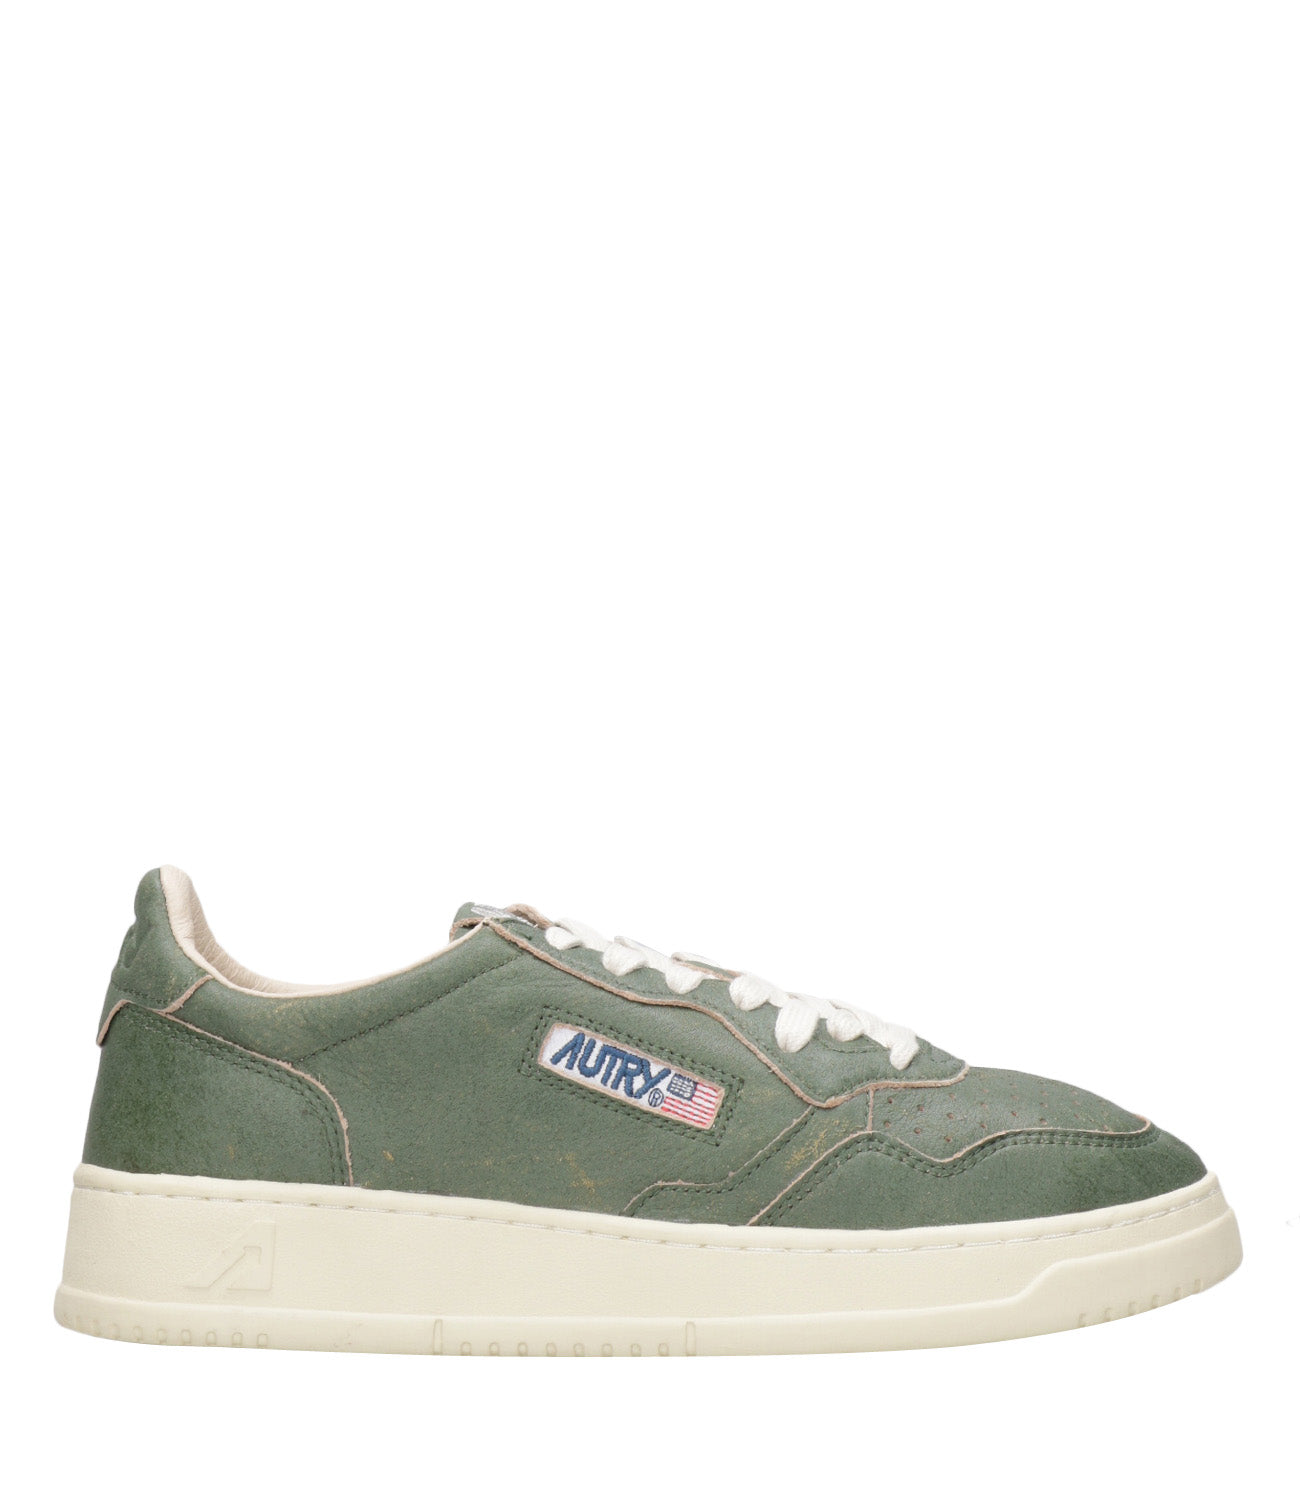 Autry | Medalist Low Sneakers Military Green